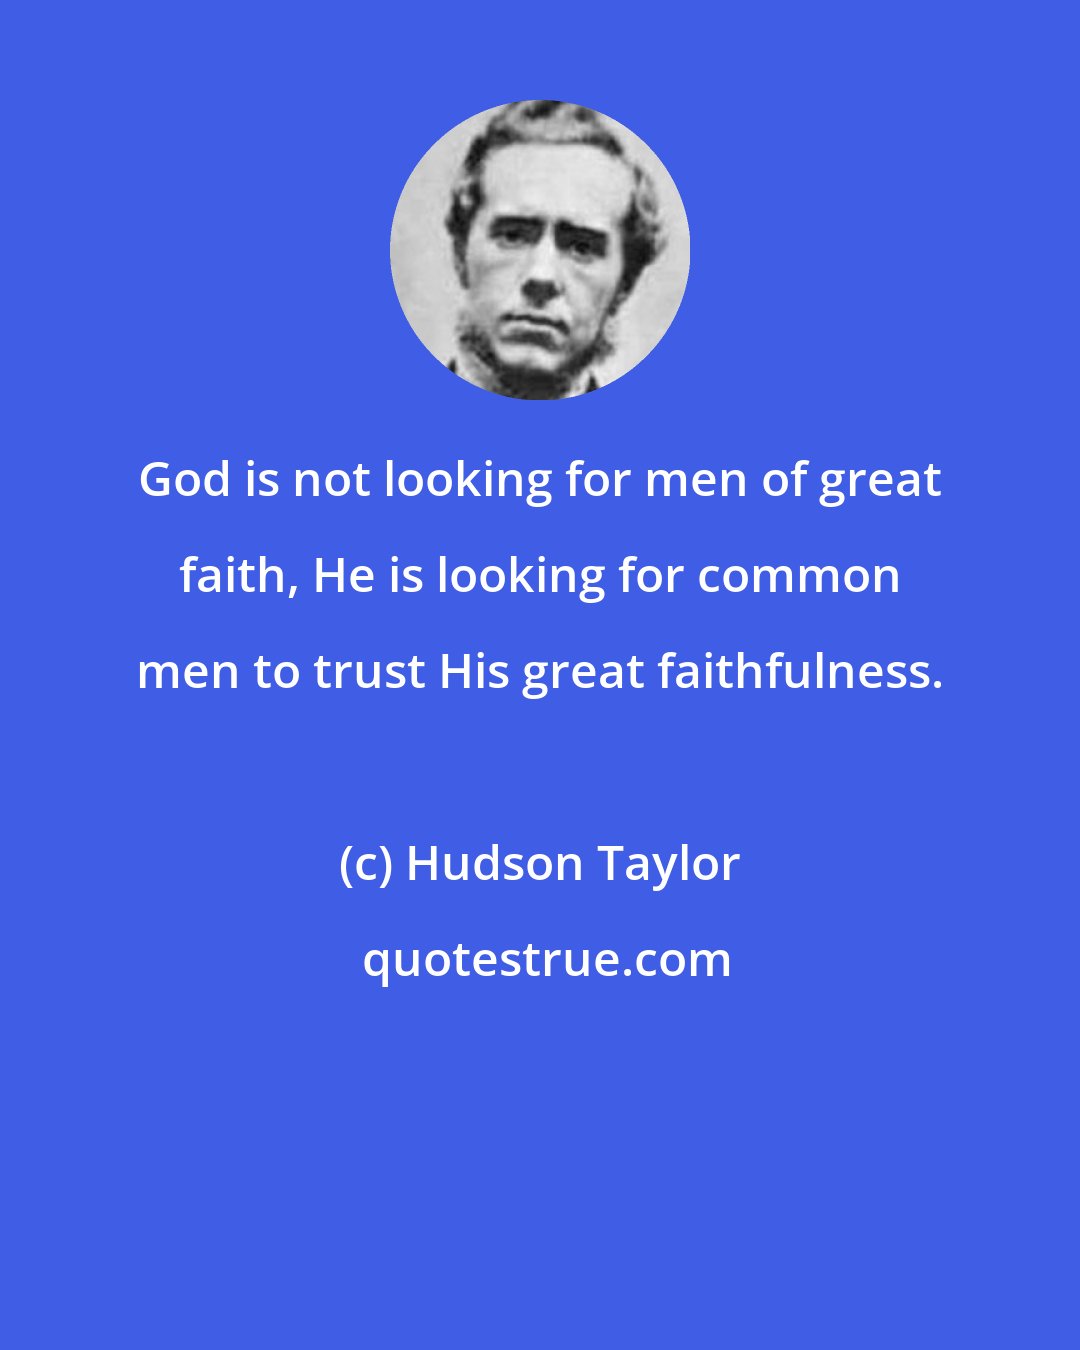 Hudson Taylor: God is not looking for men of great faith, He is looking for common men to trust His great faithfulness.